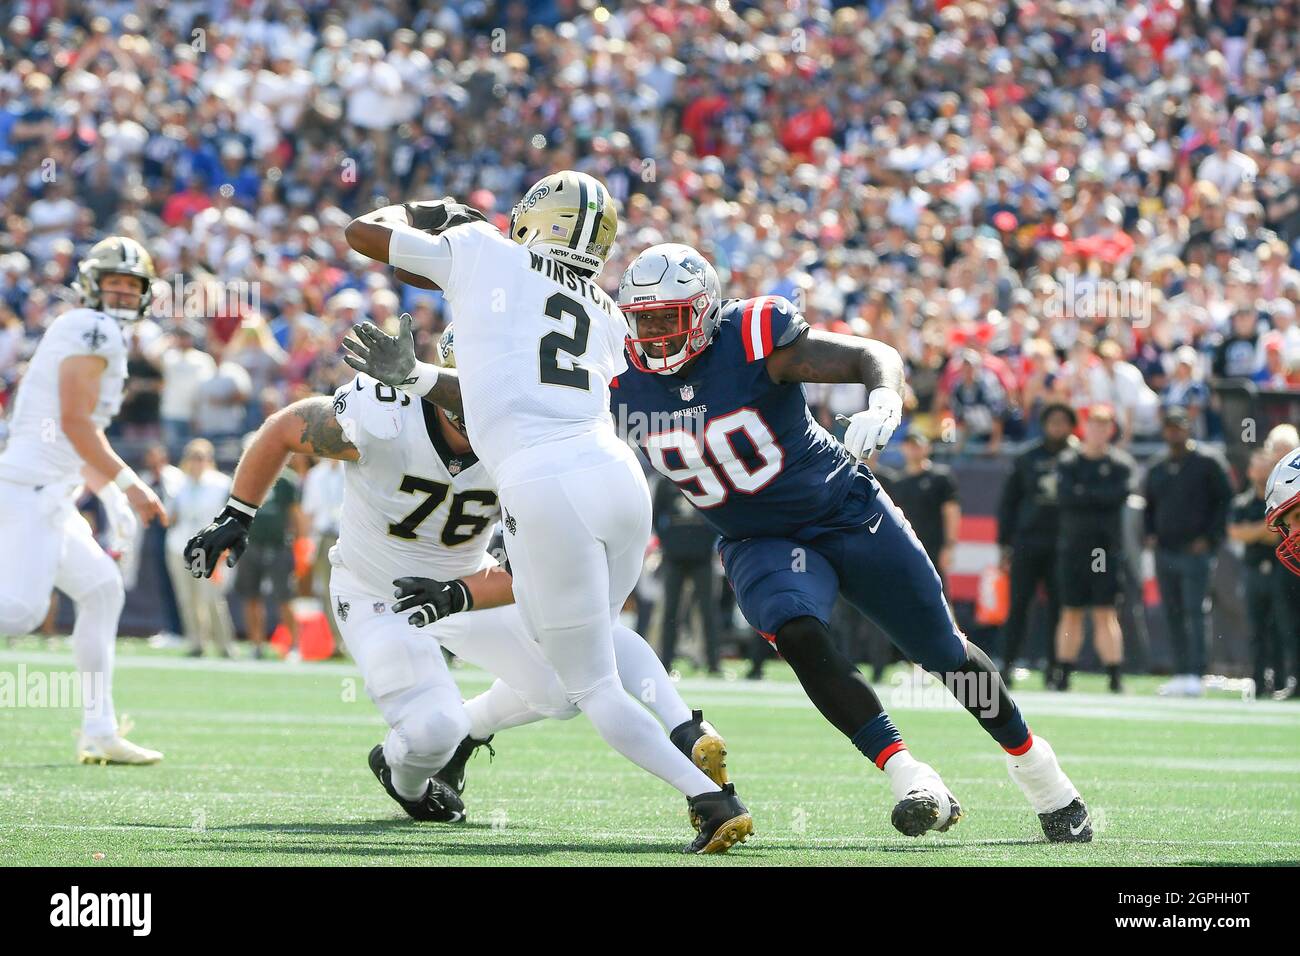 Sunday, September 26, 2021: New England Patriots defensive tackle Christian  Barmore (90) closes in on New Orleans Saints quarterback Jameis Winston (2)  during the NFL football game between the New Orleans Saints